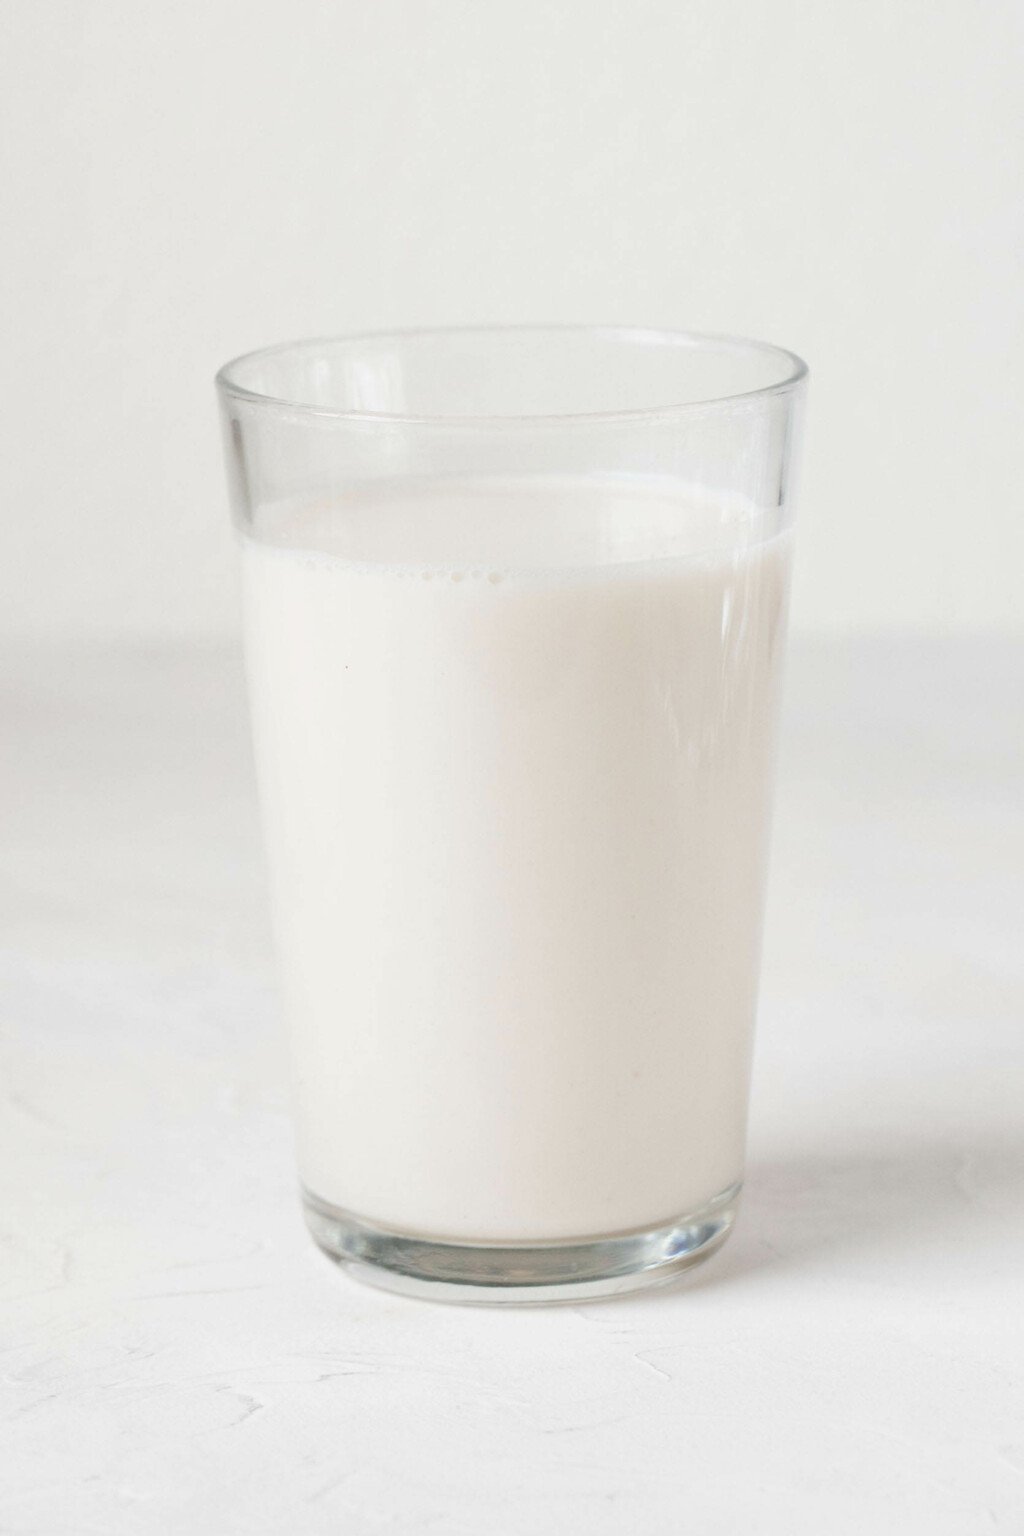 A tall, clear glass holds almond milk. It's resting on a white surface.